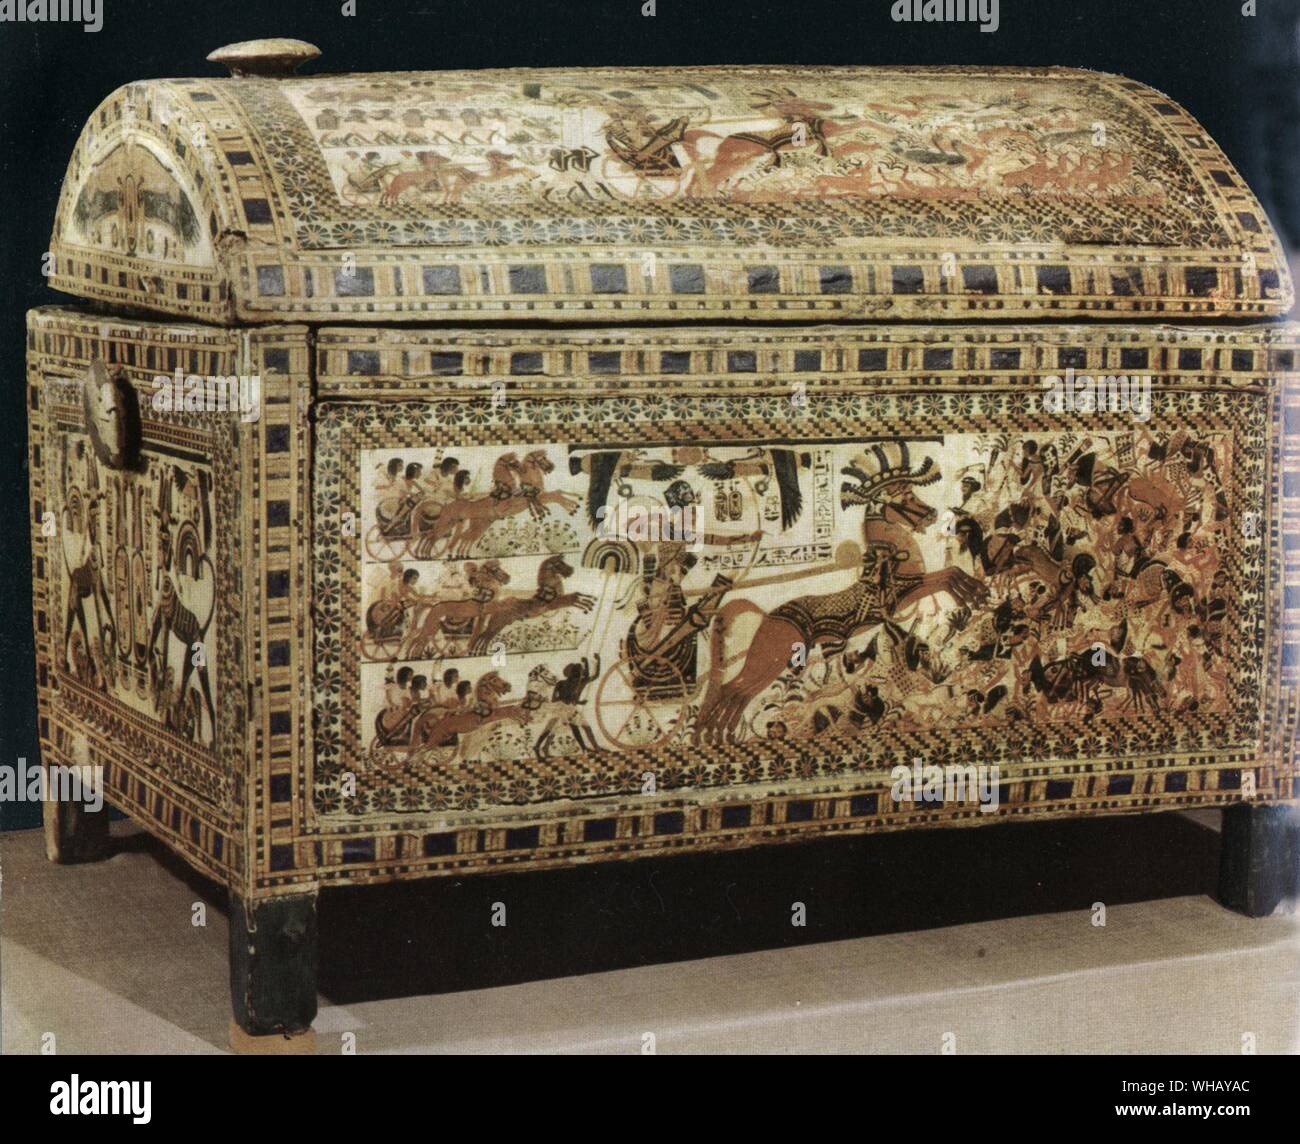 The famous painted box which shows Tutankhamen in his chariot. Tukankhamen, by Christiane Desroches Noblecourt, page 80. Stock Photo